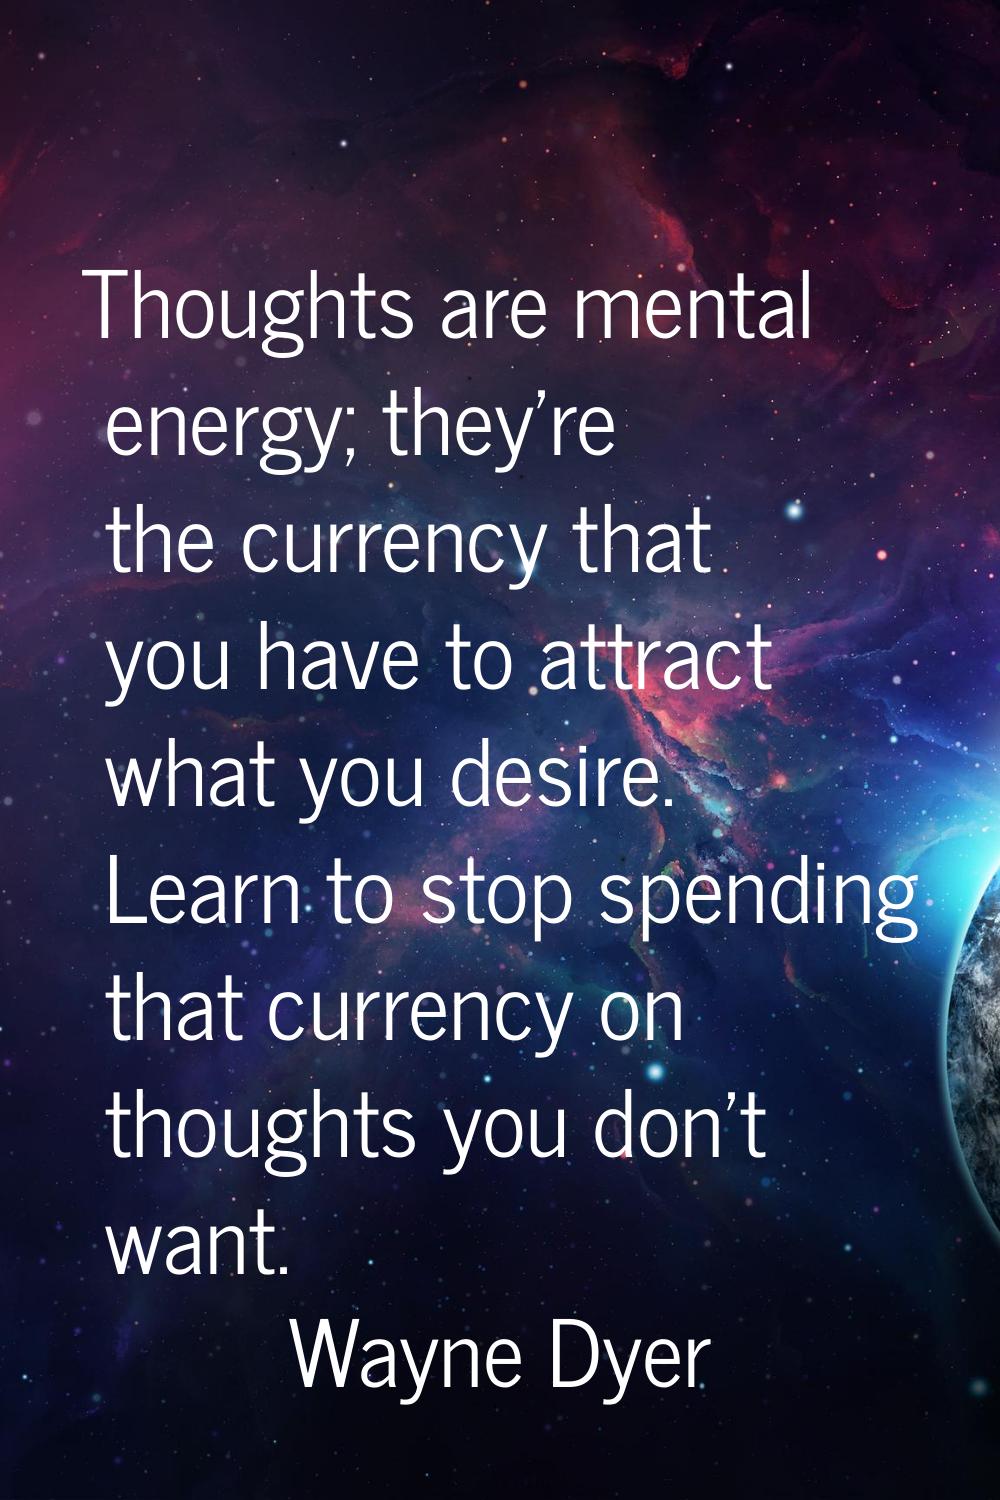 Thoughts are mental energy; they're the currency that you have to attract what you desire. Learn to